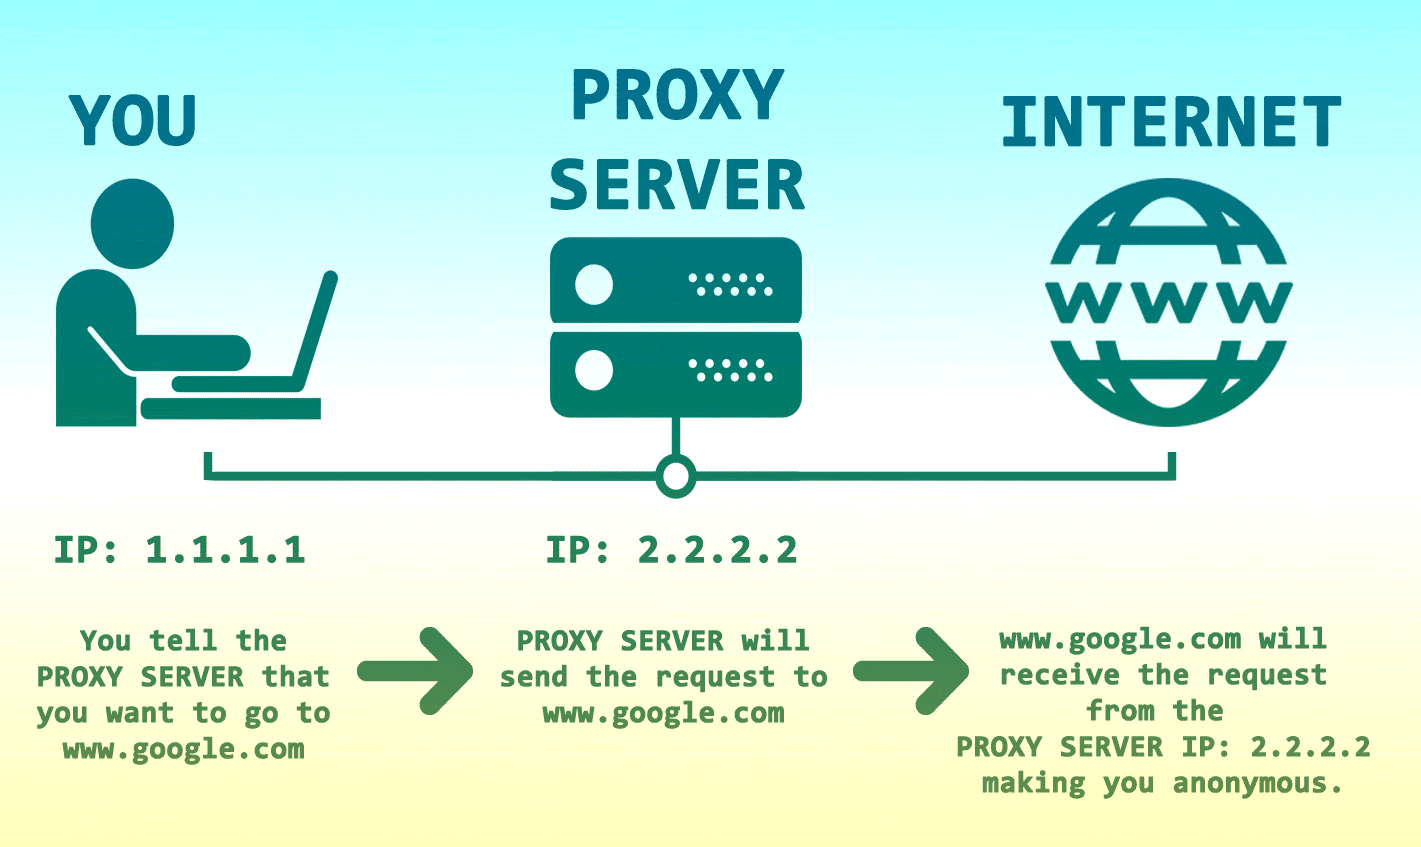 13 Best Proxy Server Services for 2021 - Free and Paid - TechJury